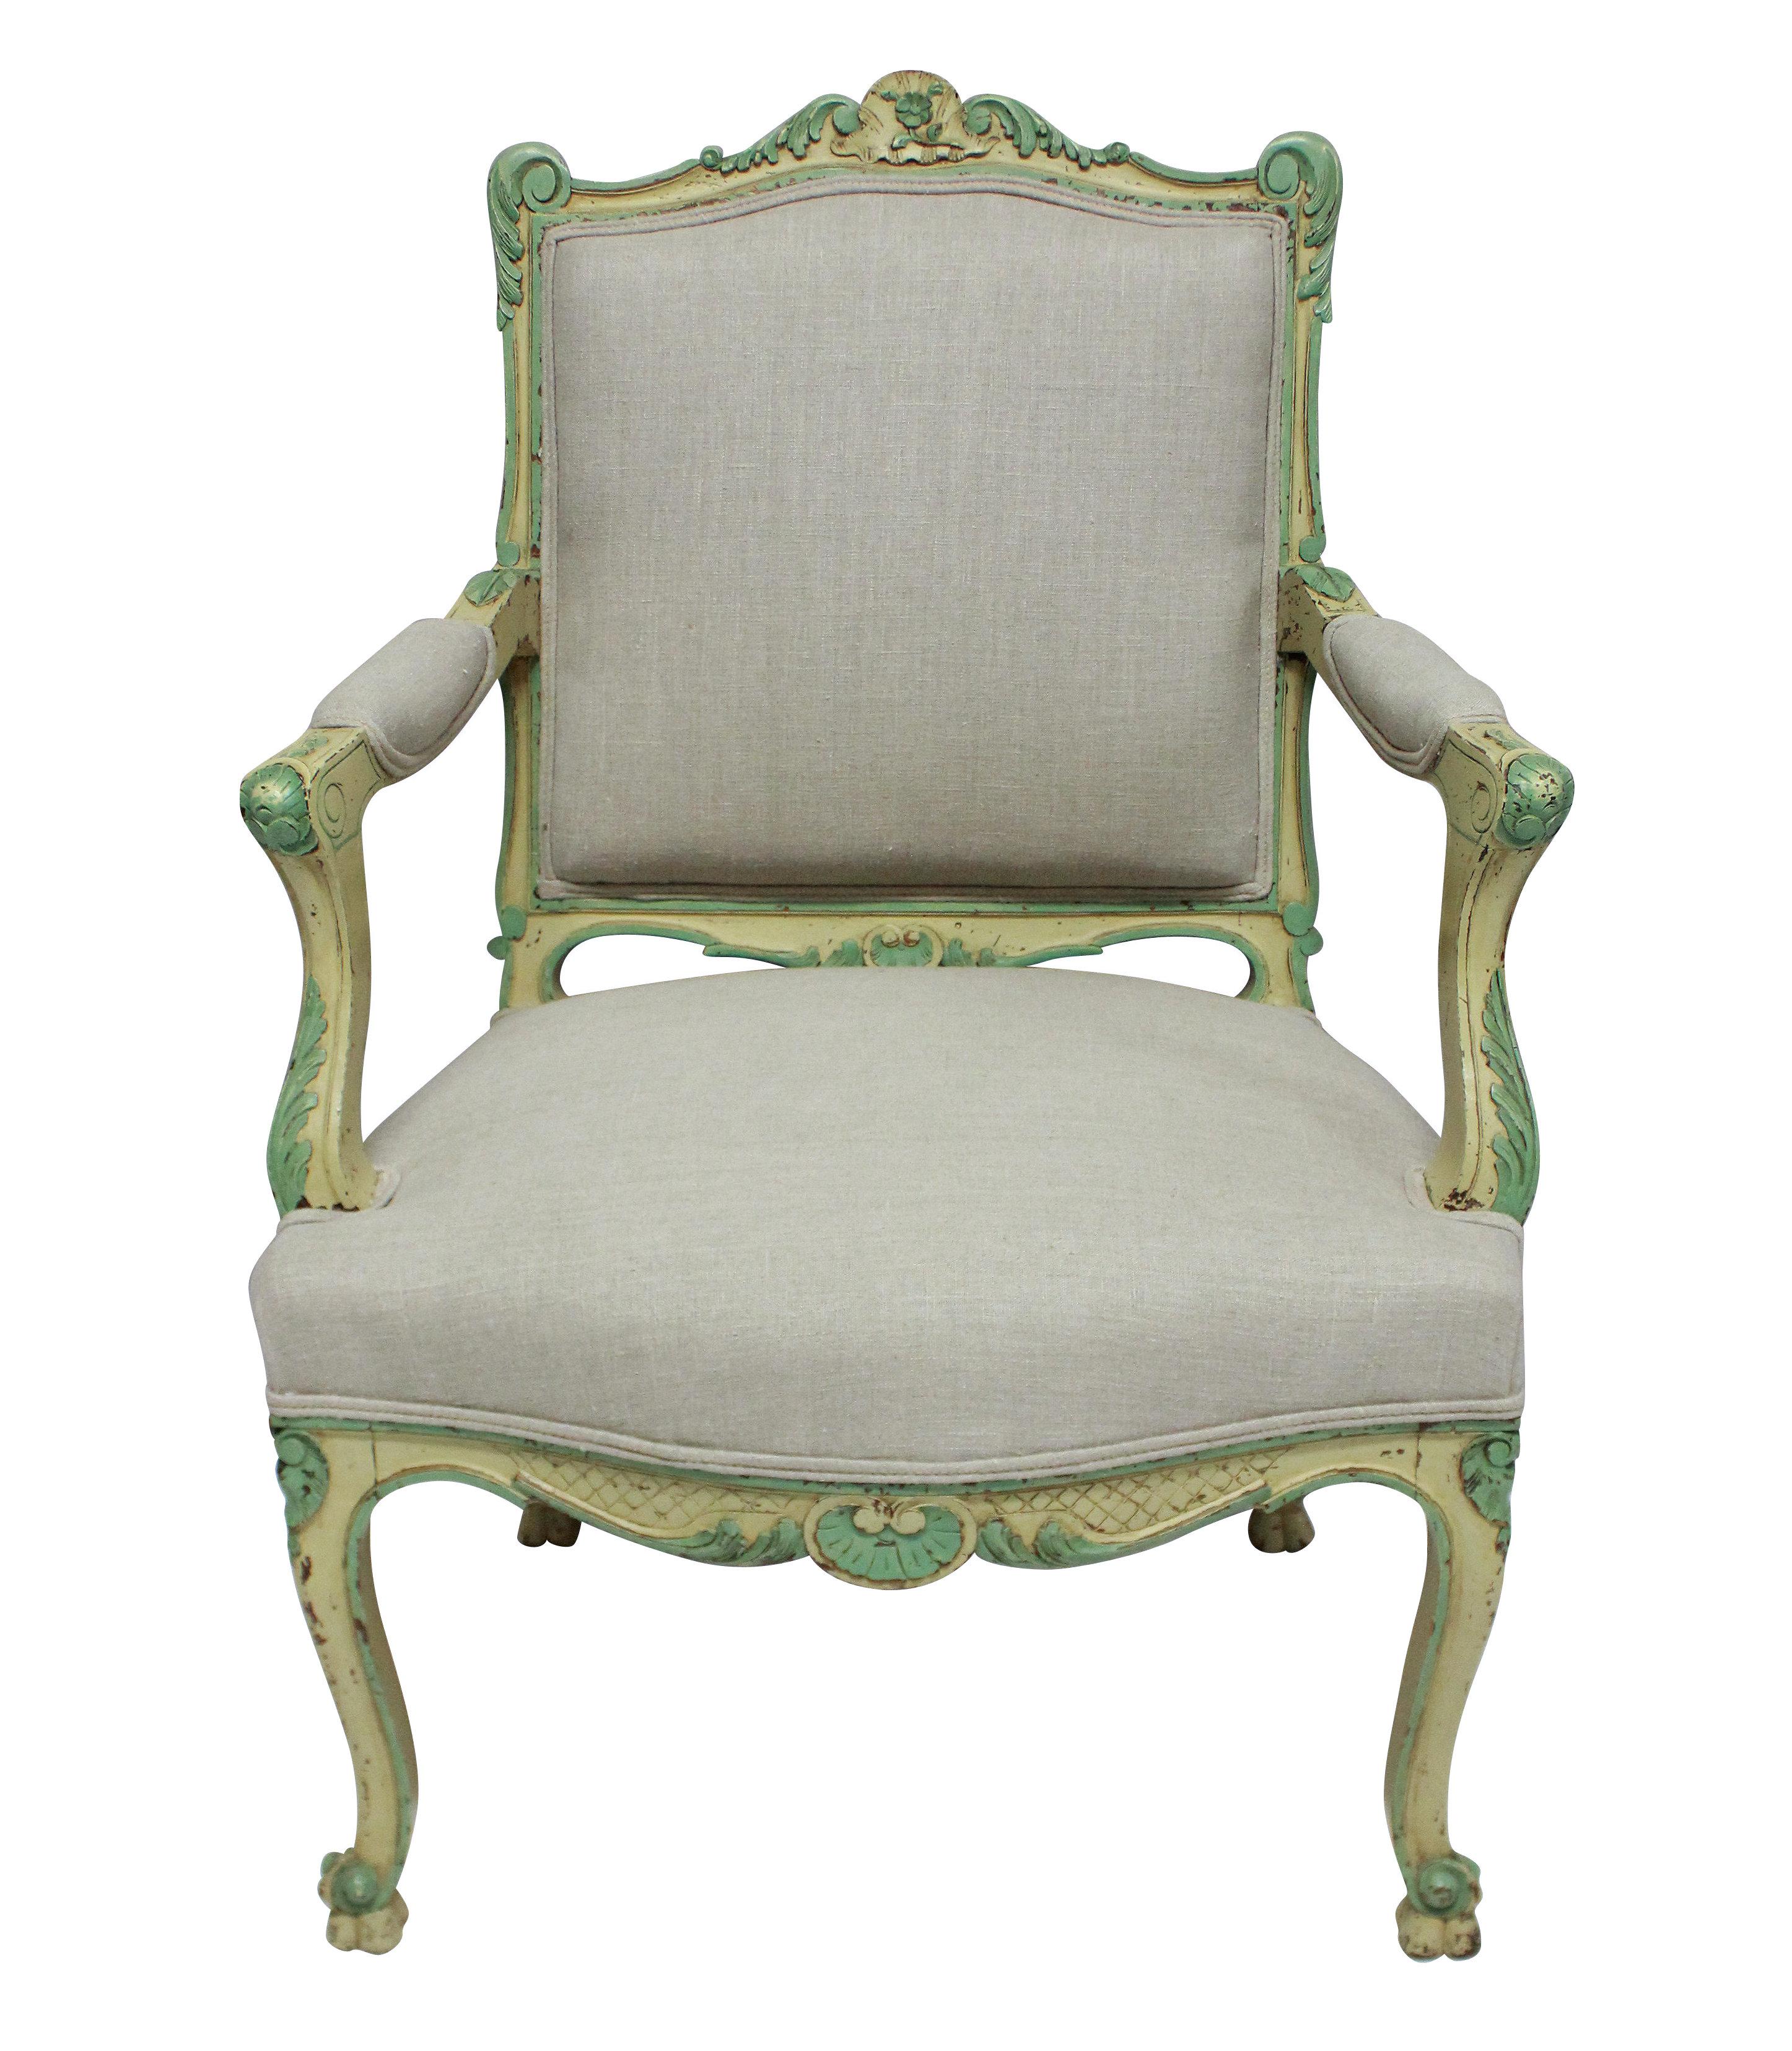 A pair of French Louis XV style walnut armchairs of generous scale, in pale yellow and green paints. Newly upholstered in raw linen.